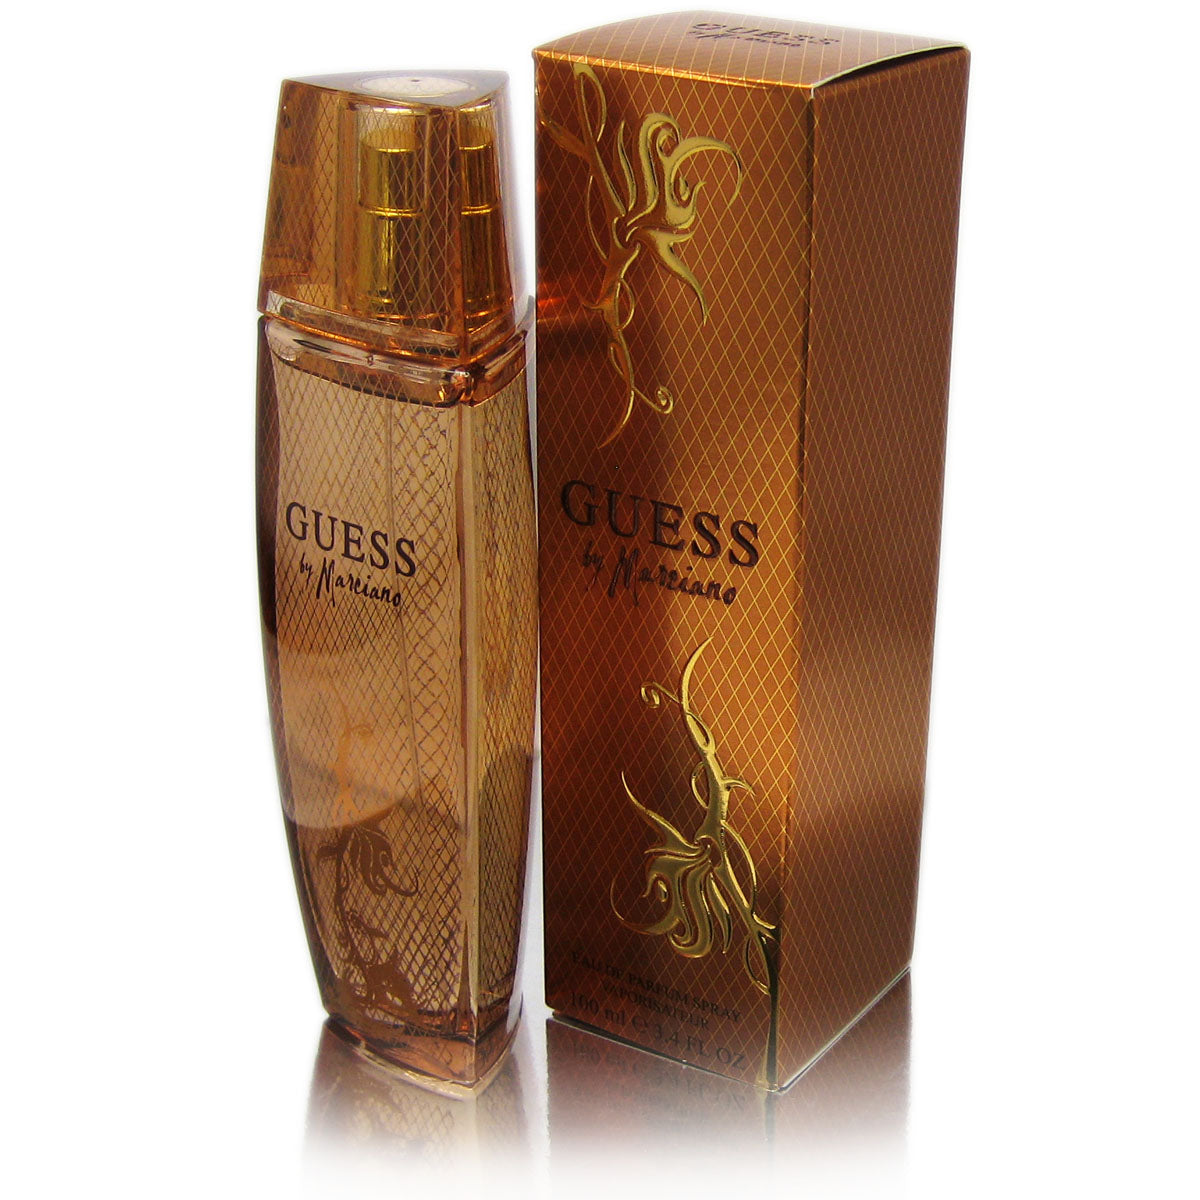 Guess Marciano 100ml EDP